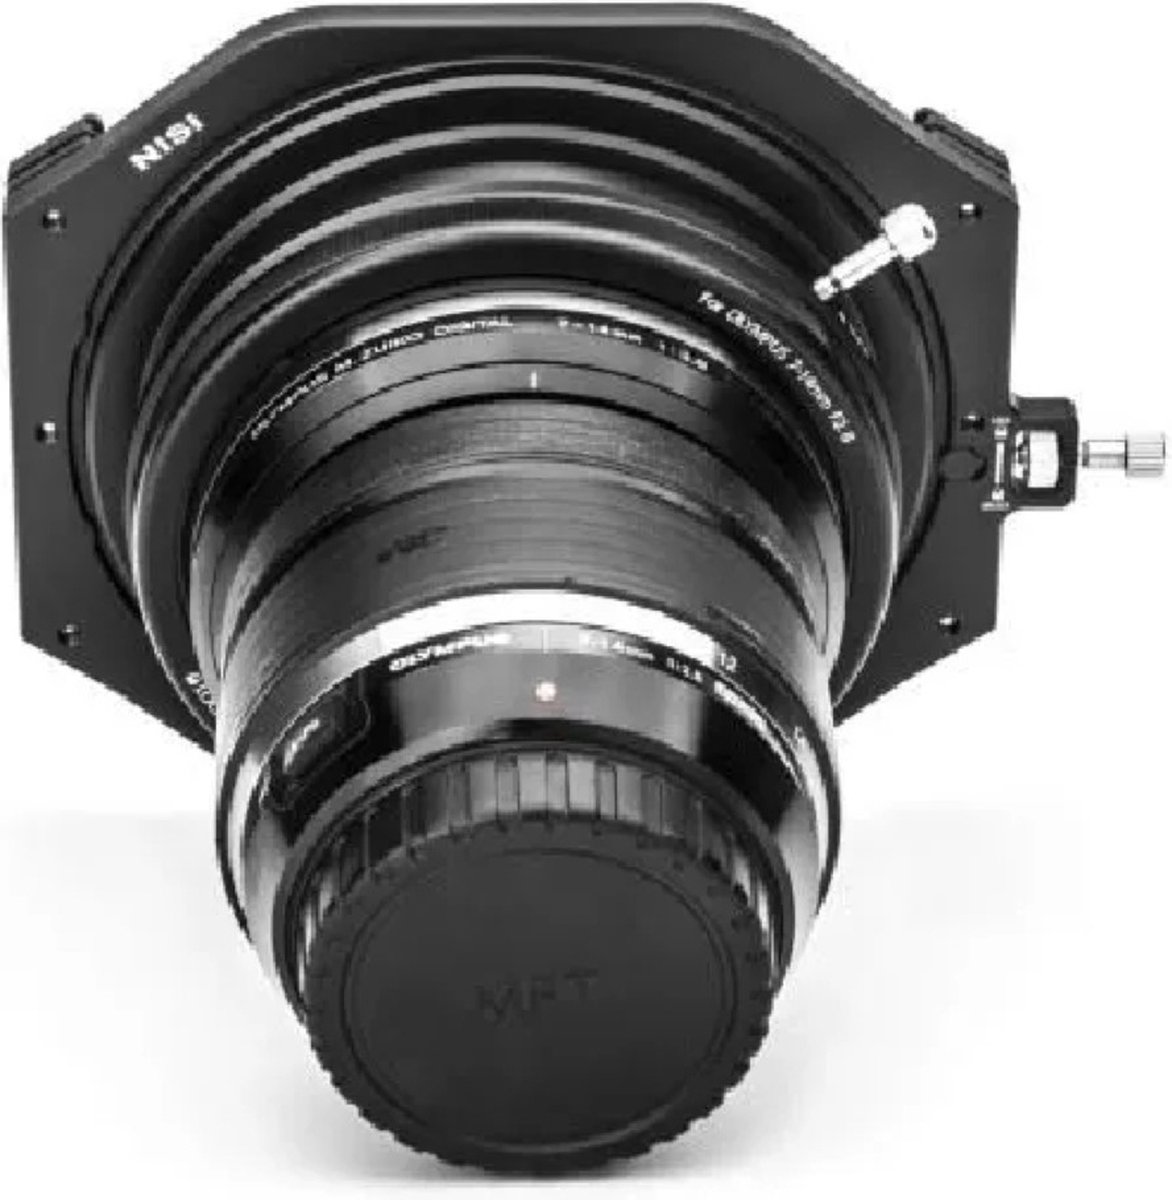 NiSi Filter Holder 100mm for Olympus 7-14mm F2.8